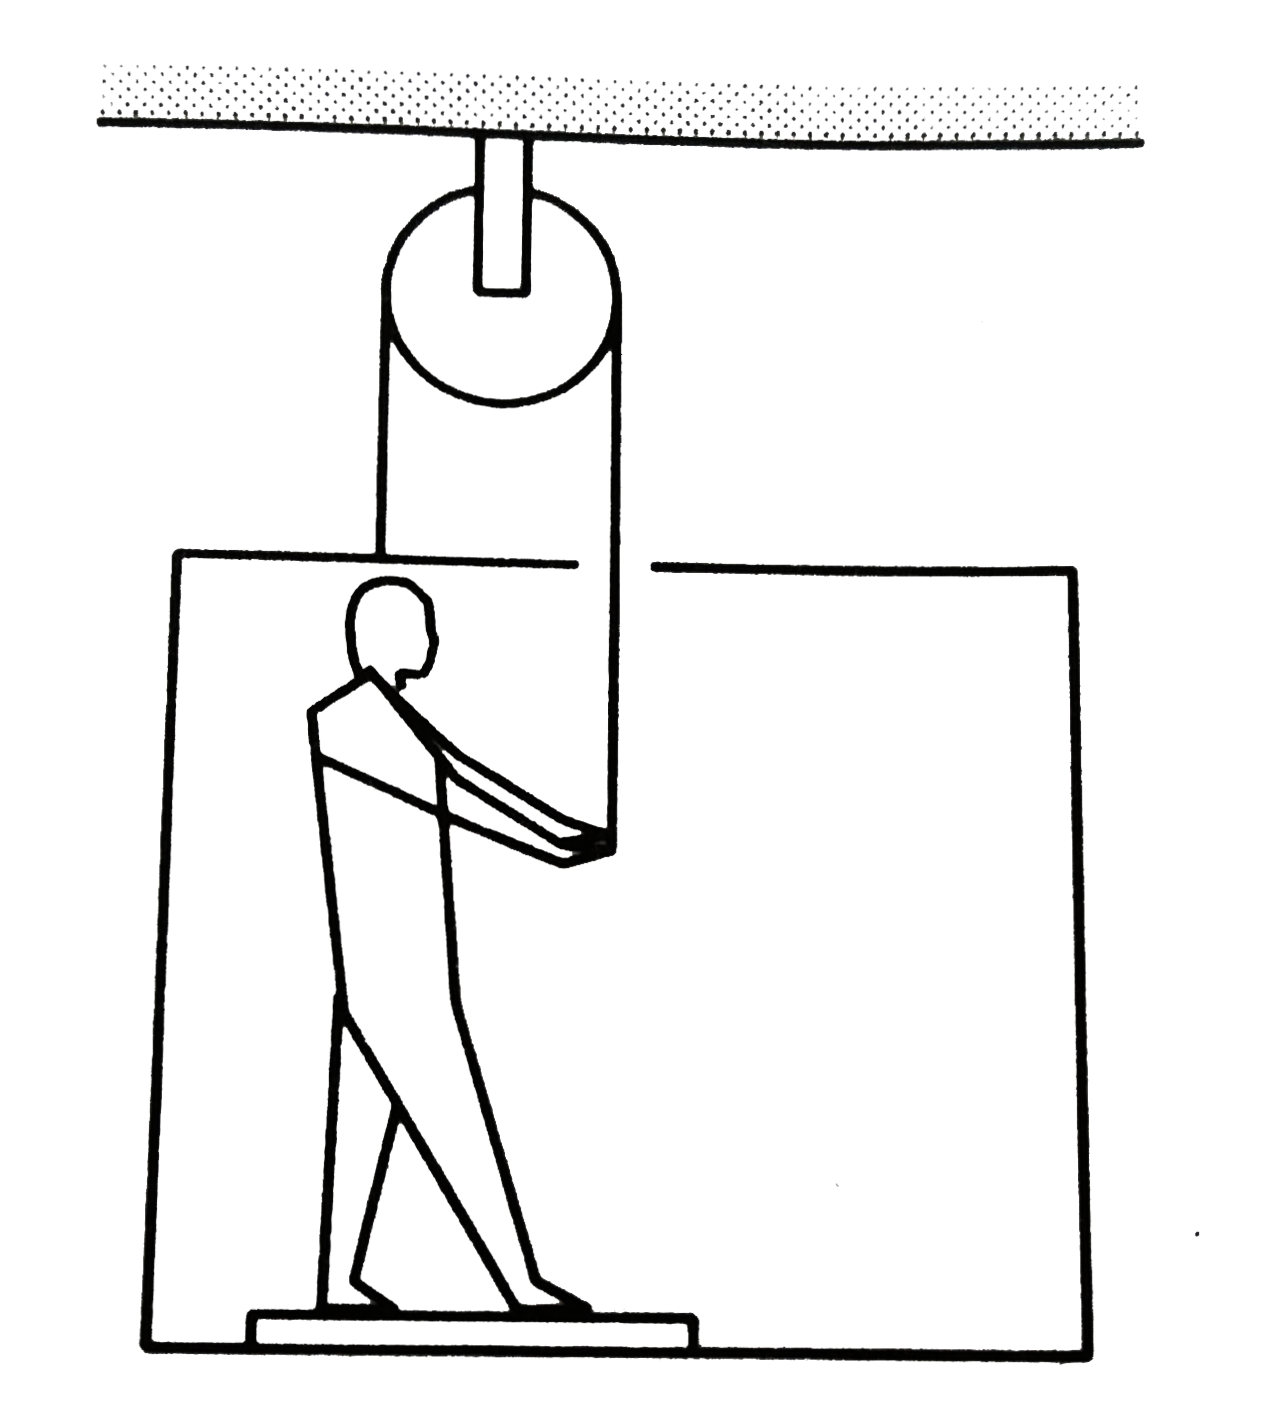 Figure shows a man of mass 60 kg standing on a light weighting machine kept in a box of mass 30 kg. The box is hanging from a pulley fixed to the ceiling through a light rope, the other end of which is held by the man himself. If the man manages to keep the box at rest, what is the weight shown by the machine? What force should he exert on the rope to get his correct weight on the machine?